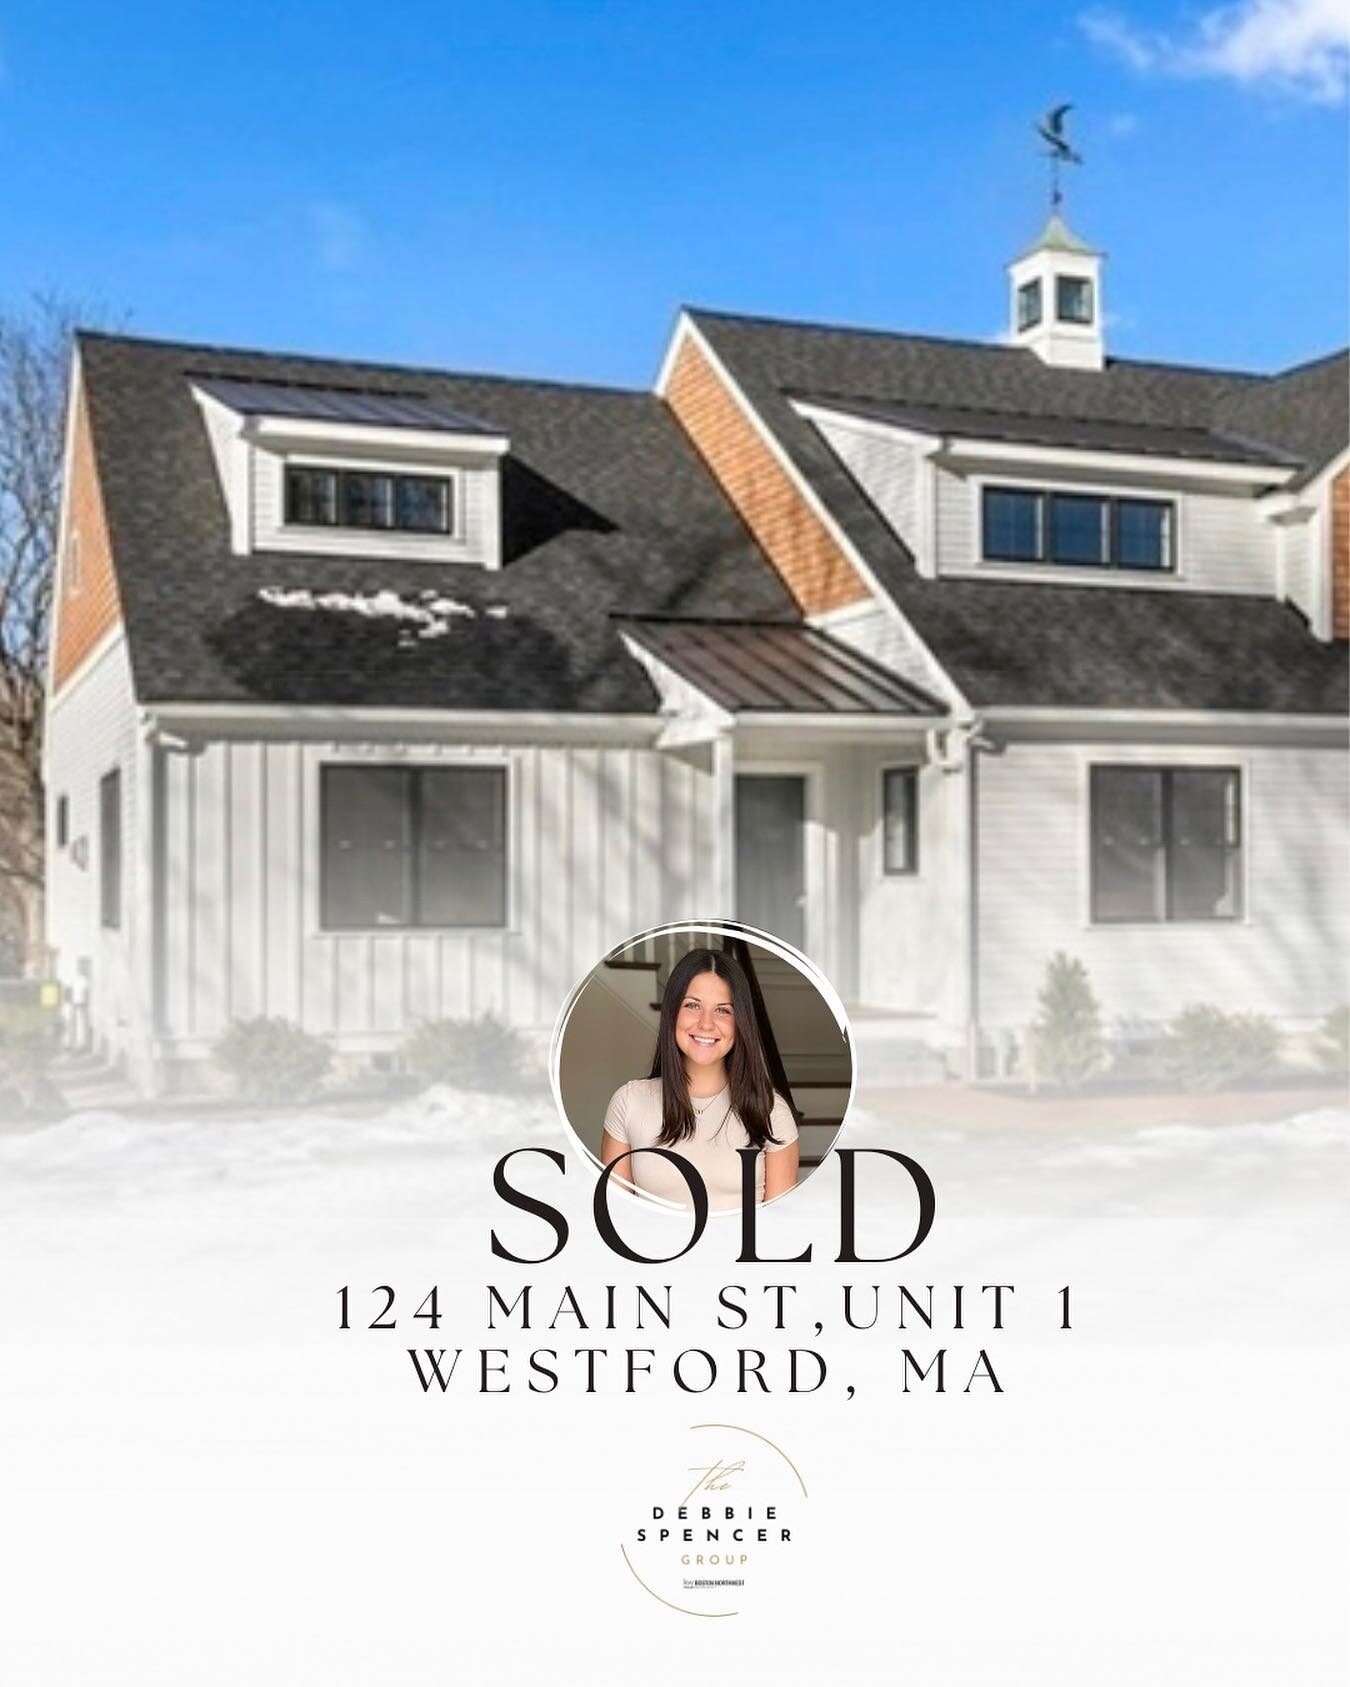 So excited for Nicole &amp; her client who closed on this amazing farmhouse condo on Thursday! 

These new construction condos have a really cool story to them &amp; luckily theres still one available!! DM us if you want more info!!

Way to go Nicole